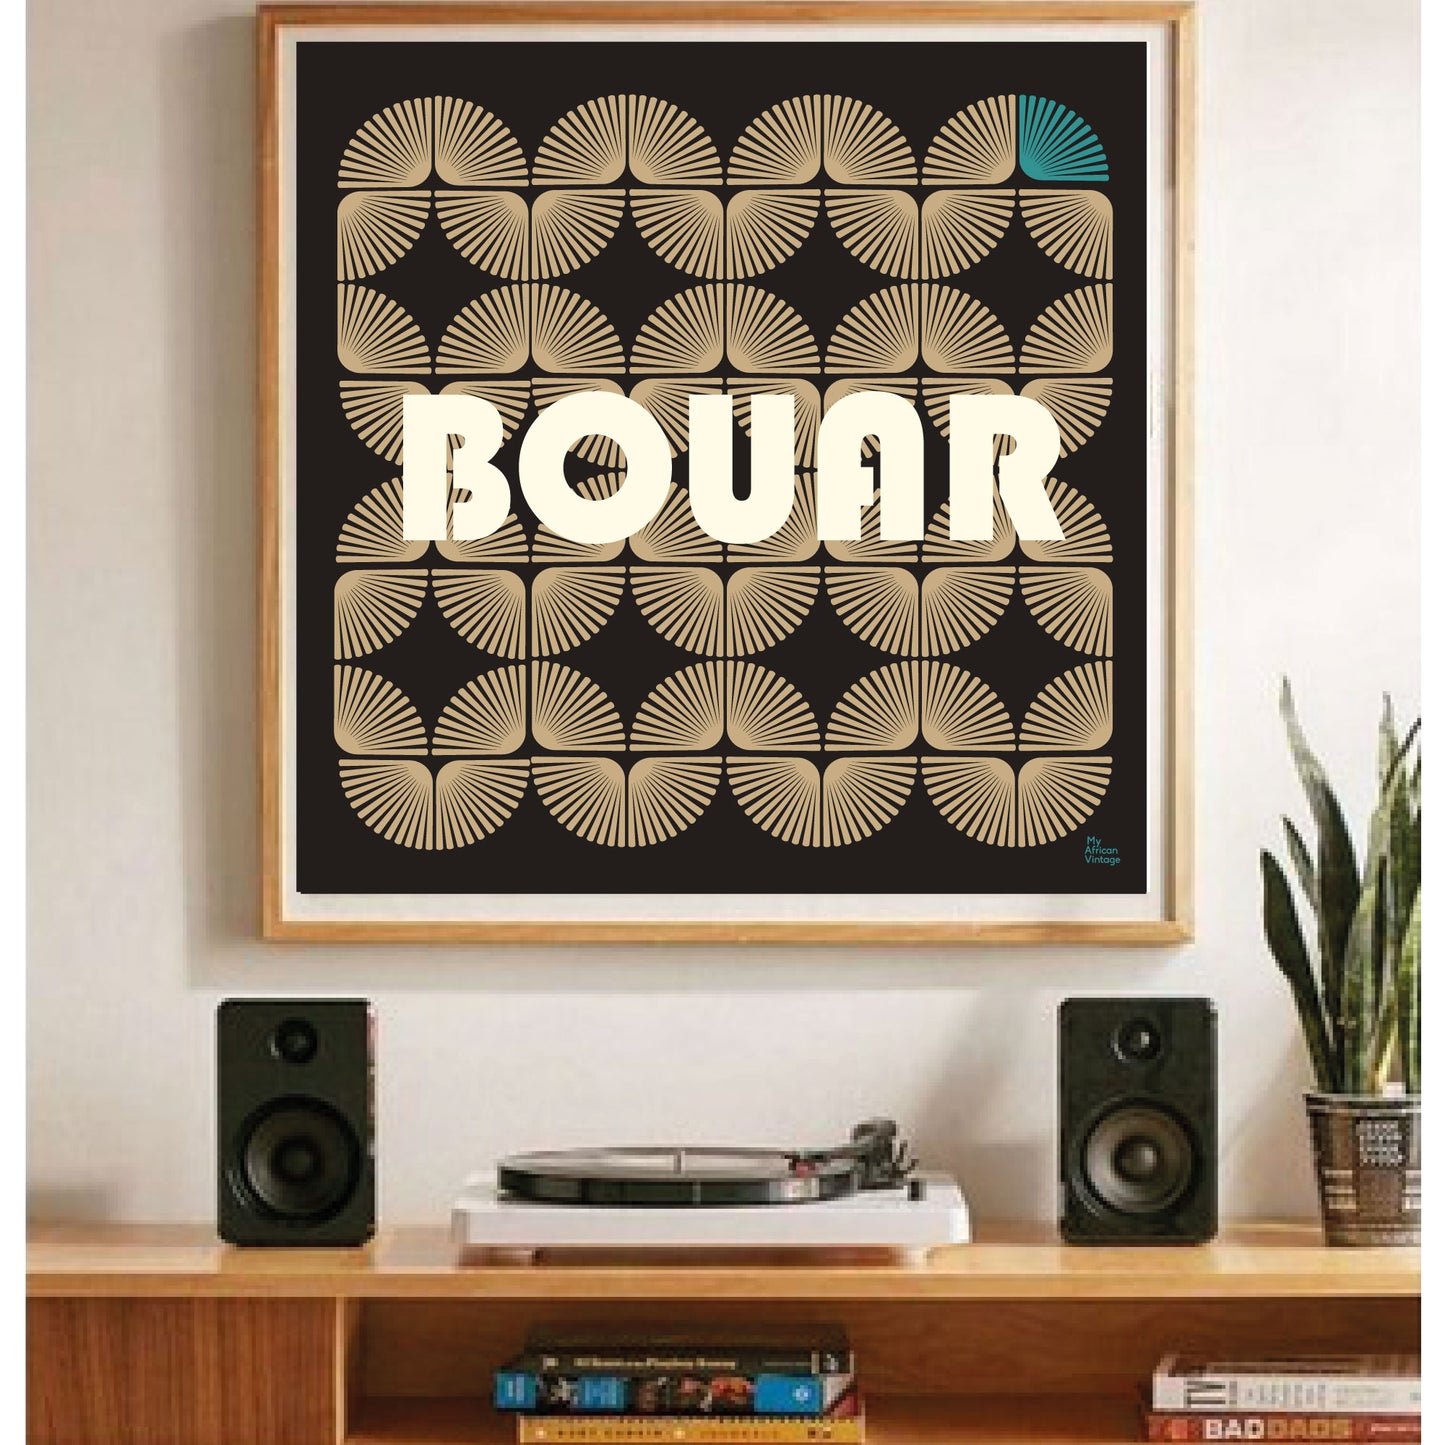 "Bouar" retro style poster - "My African Vintage" collection